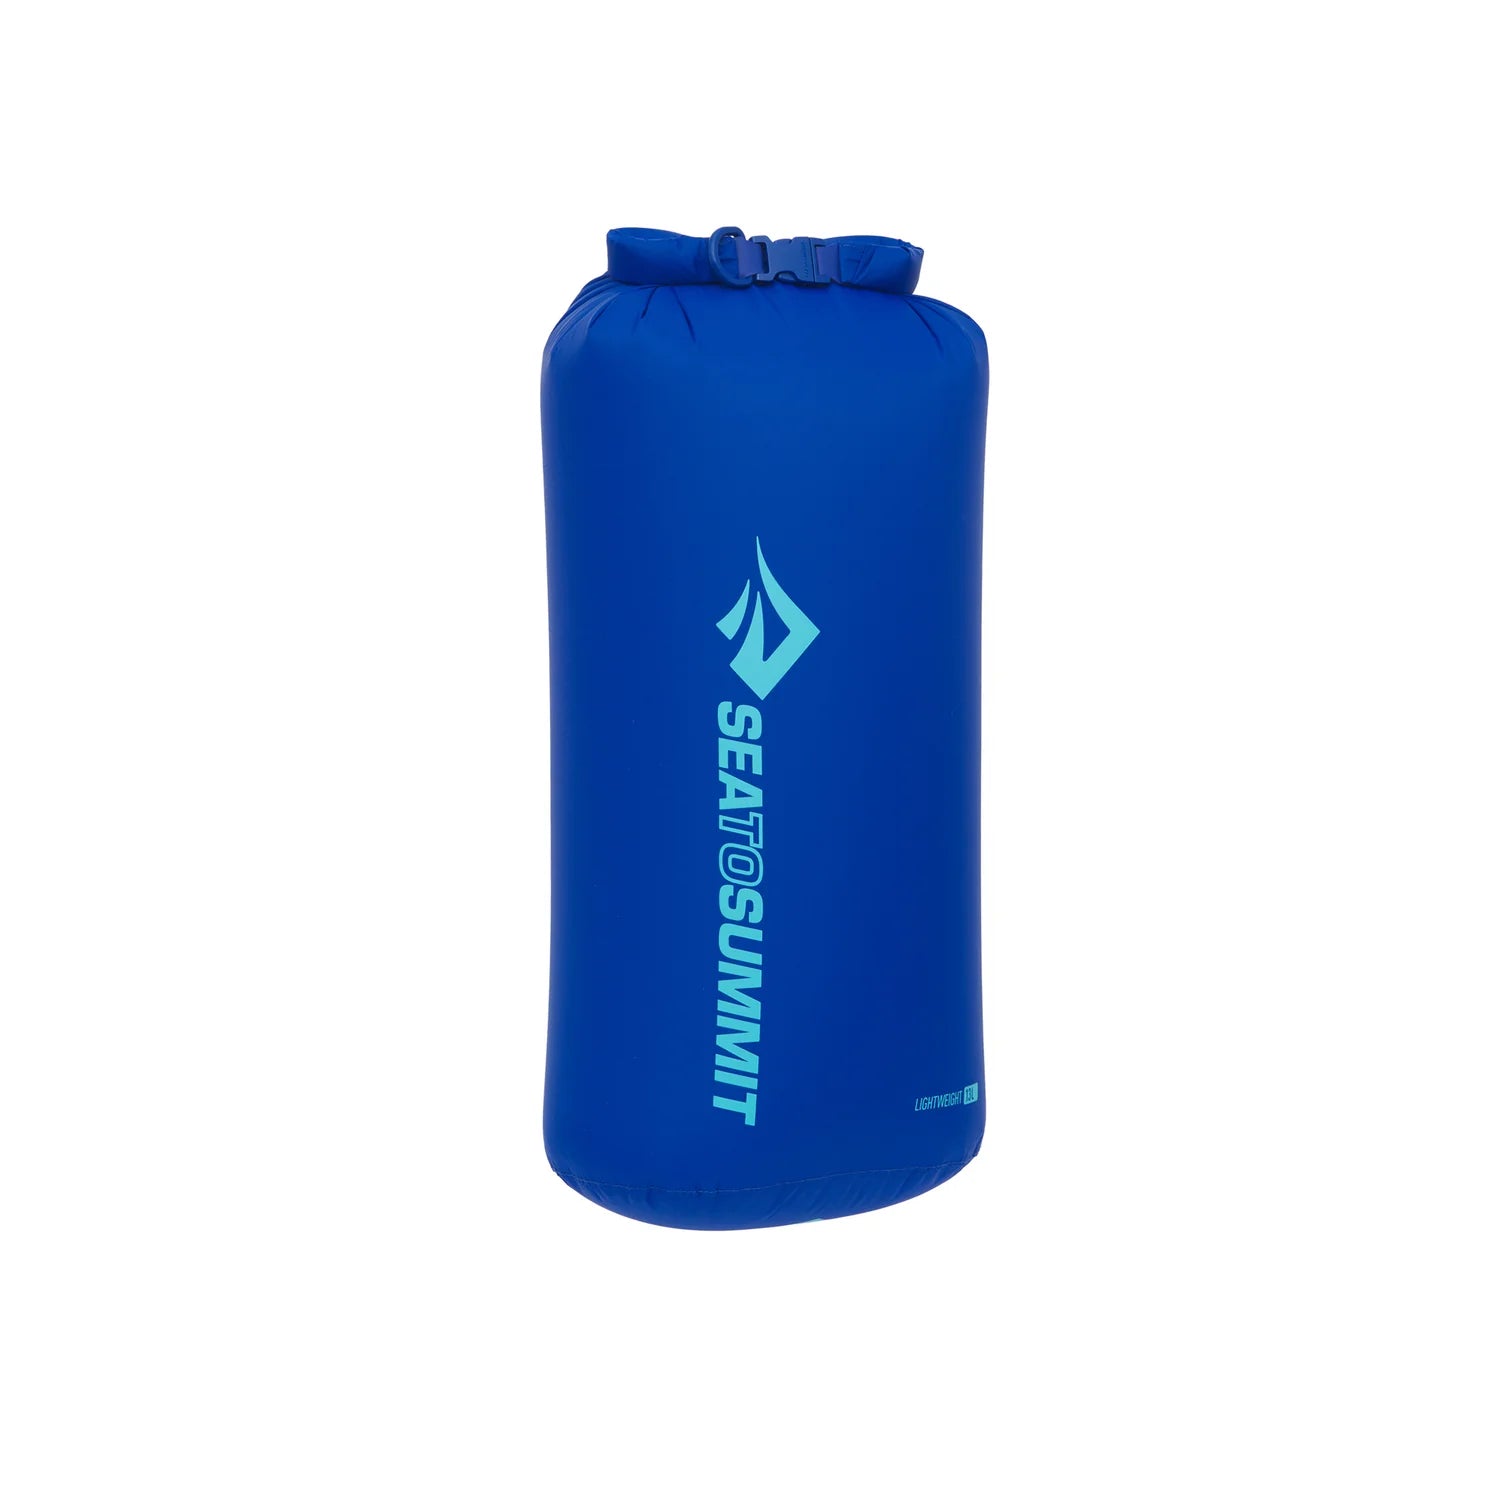 Sea to Summit - Lightweight Dry Bag 13L - Surf the Web